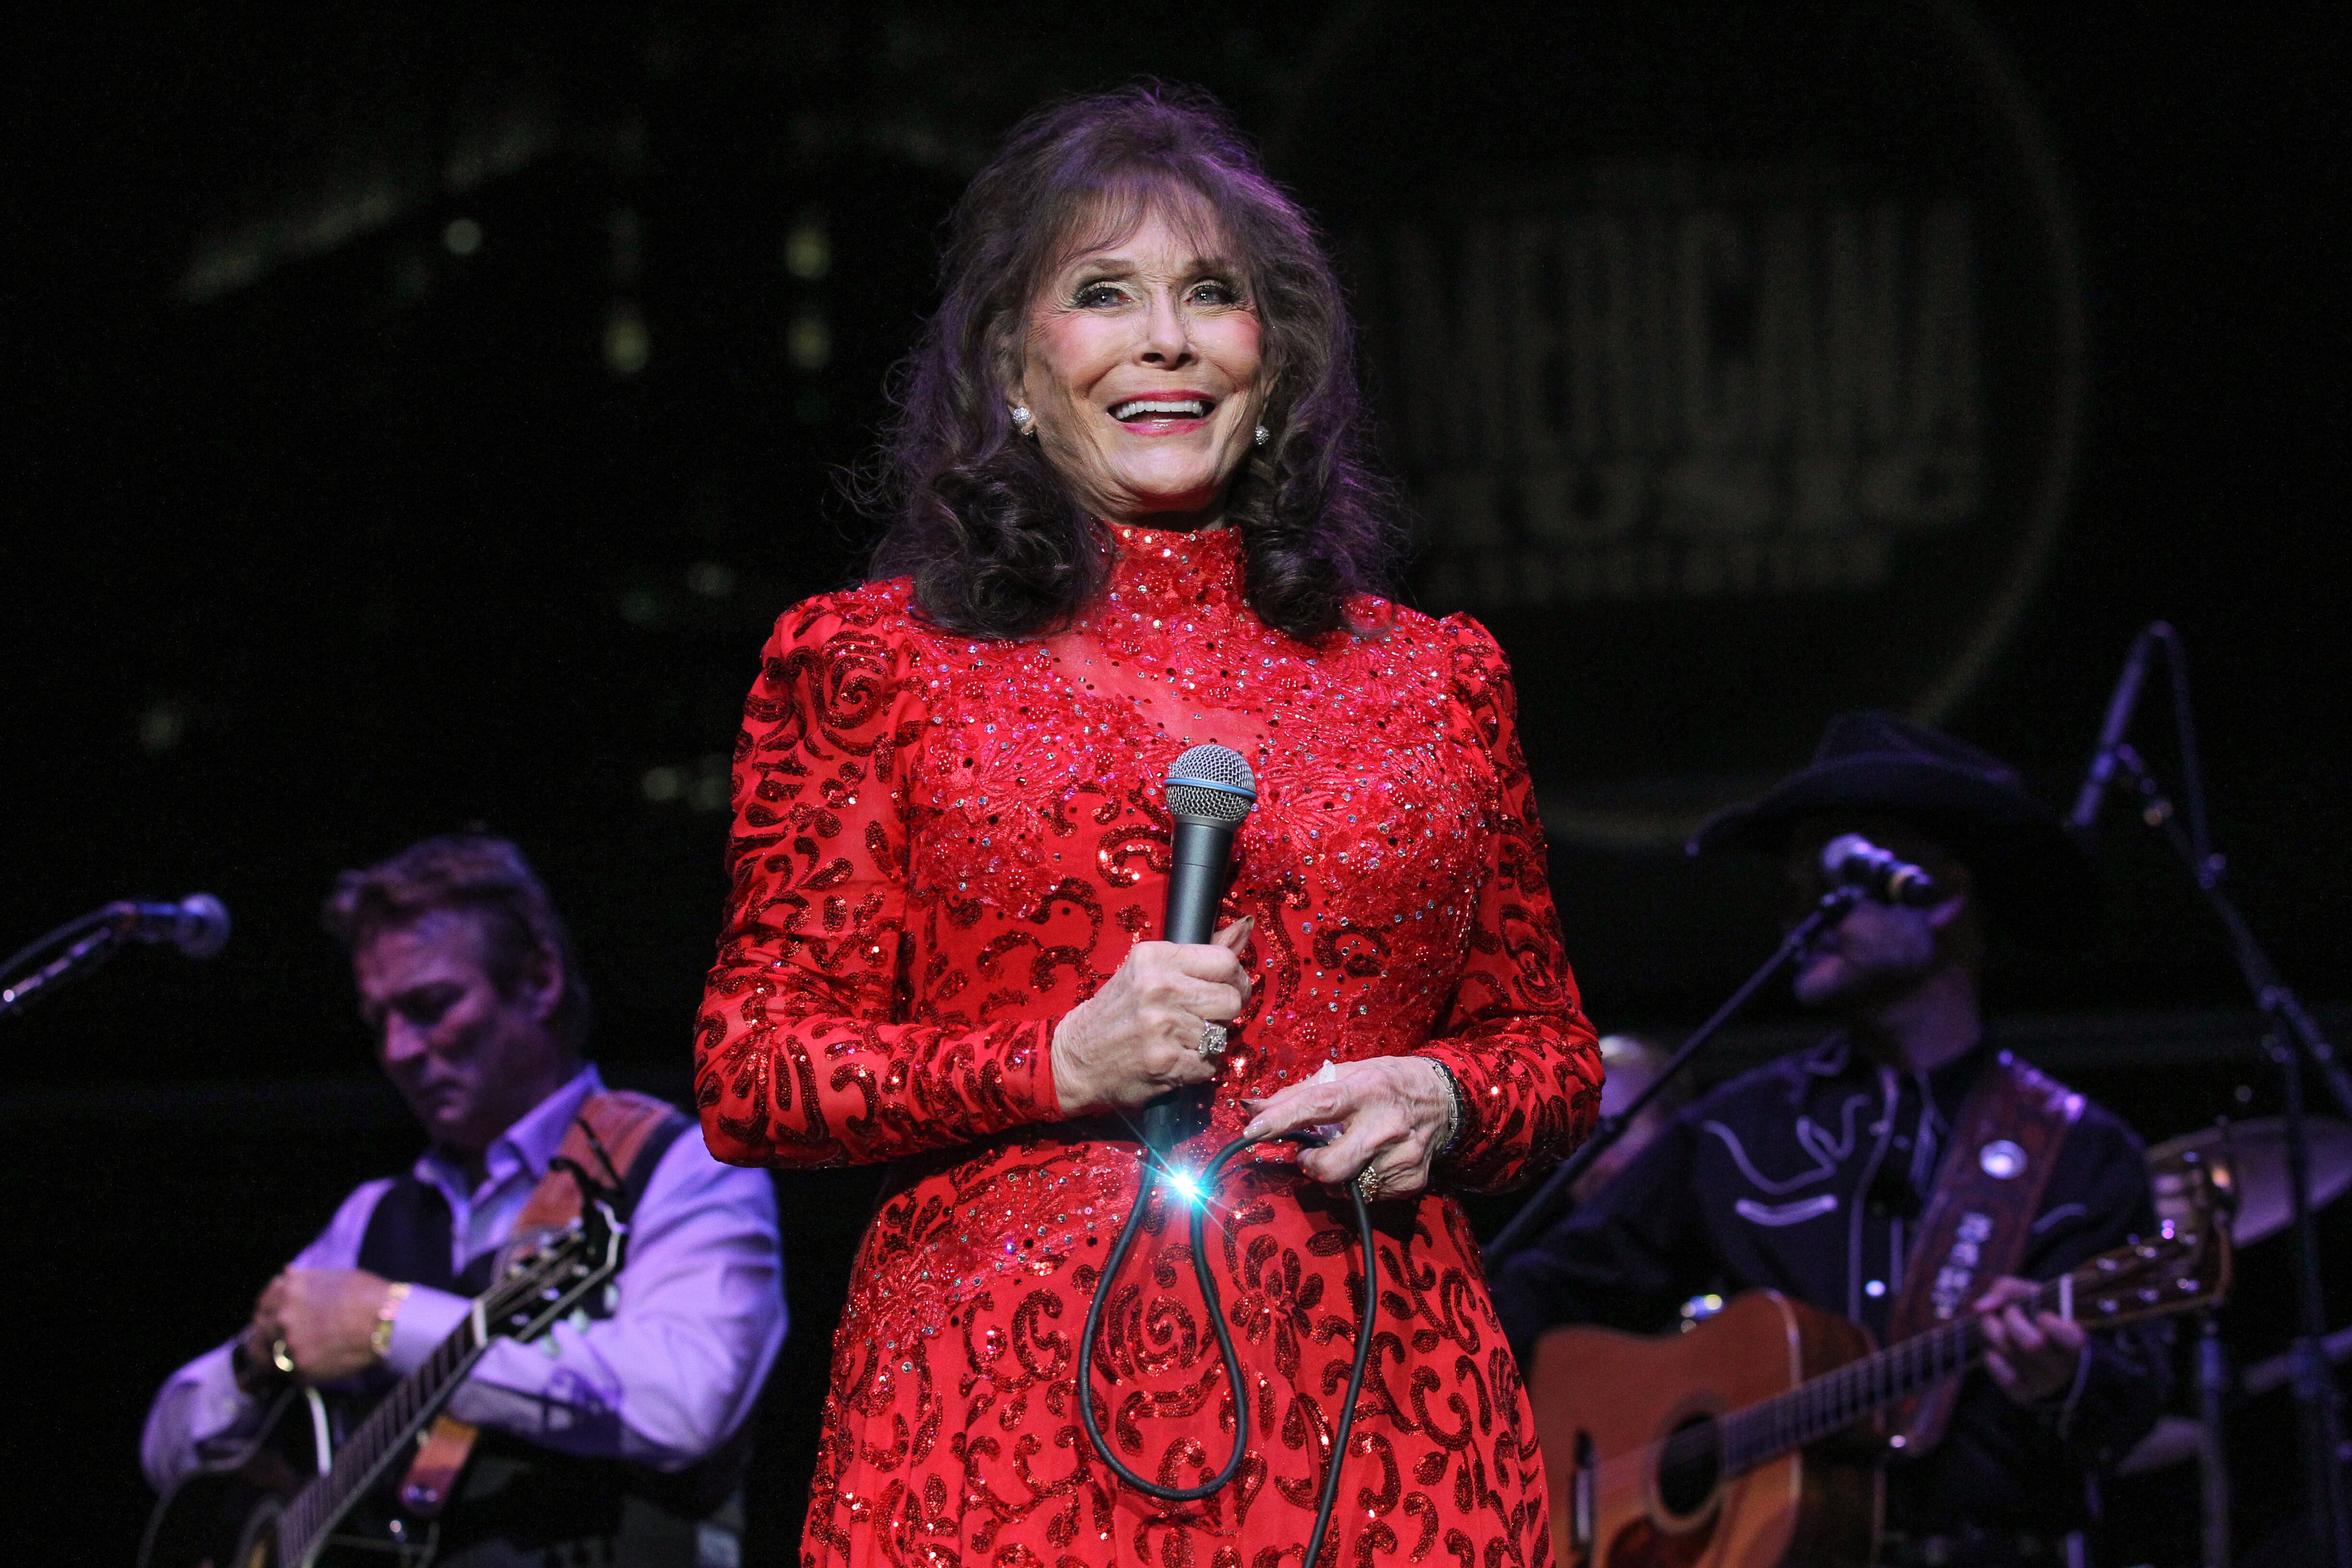 Loretta Lynn at the 16th Annual Americana Music Festival on September 19, 2015 in Nashville, Tennessee. | Photo: Getty Images